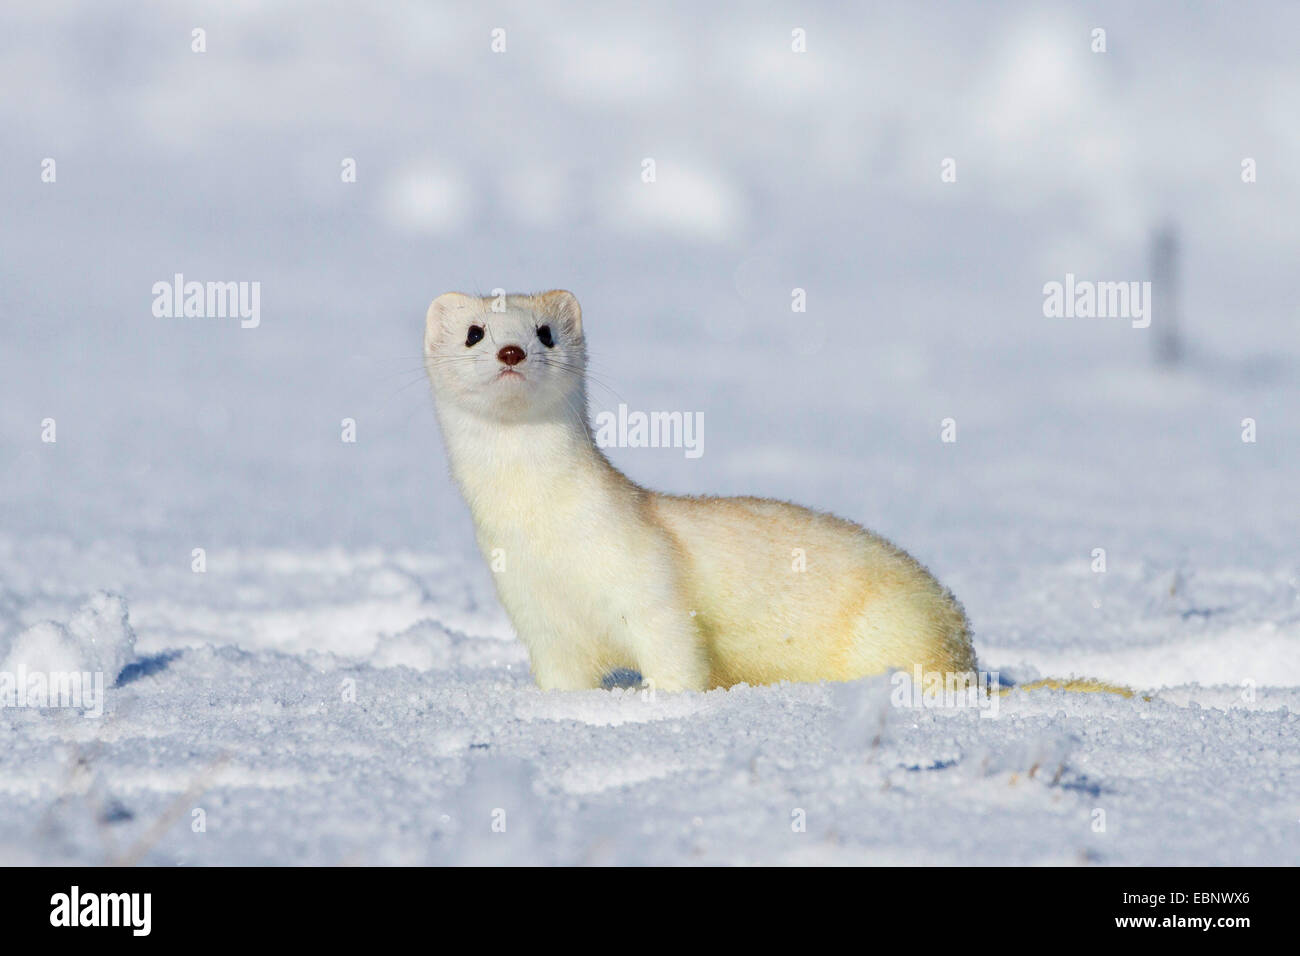 Ermine, Stoat, Short-tailed weasel (Mustela erminea), in snow, Germany Stock Photo